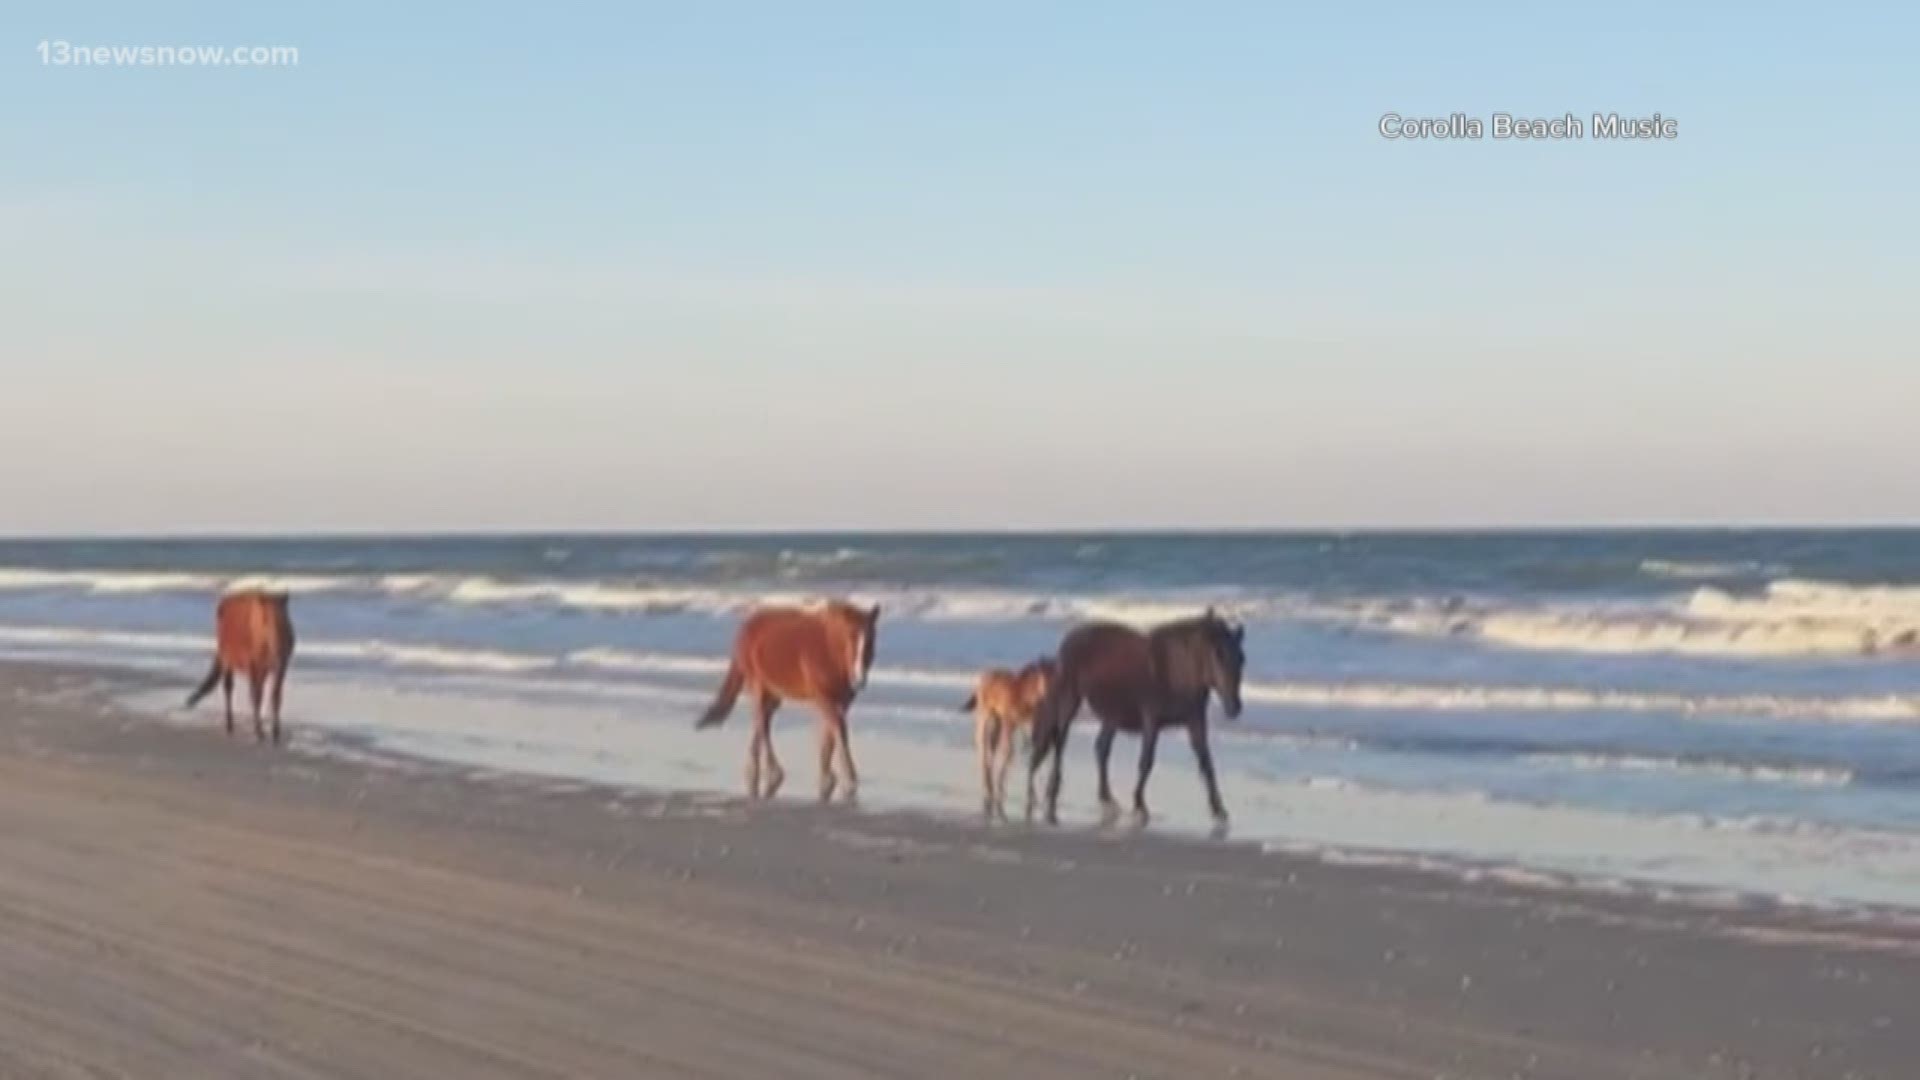 Work is underway to keep the wild horses in Corolla a bit safer. A fence that keeps the horses on the beach is getting repaired.